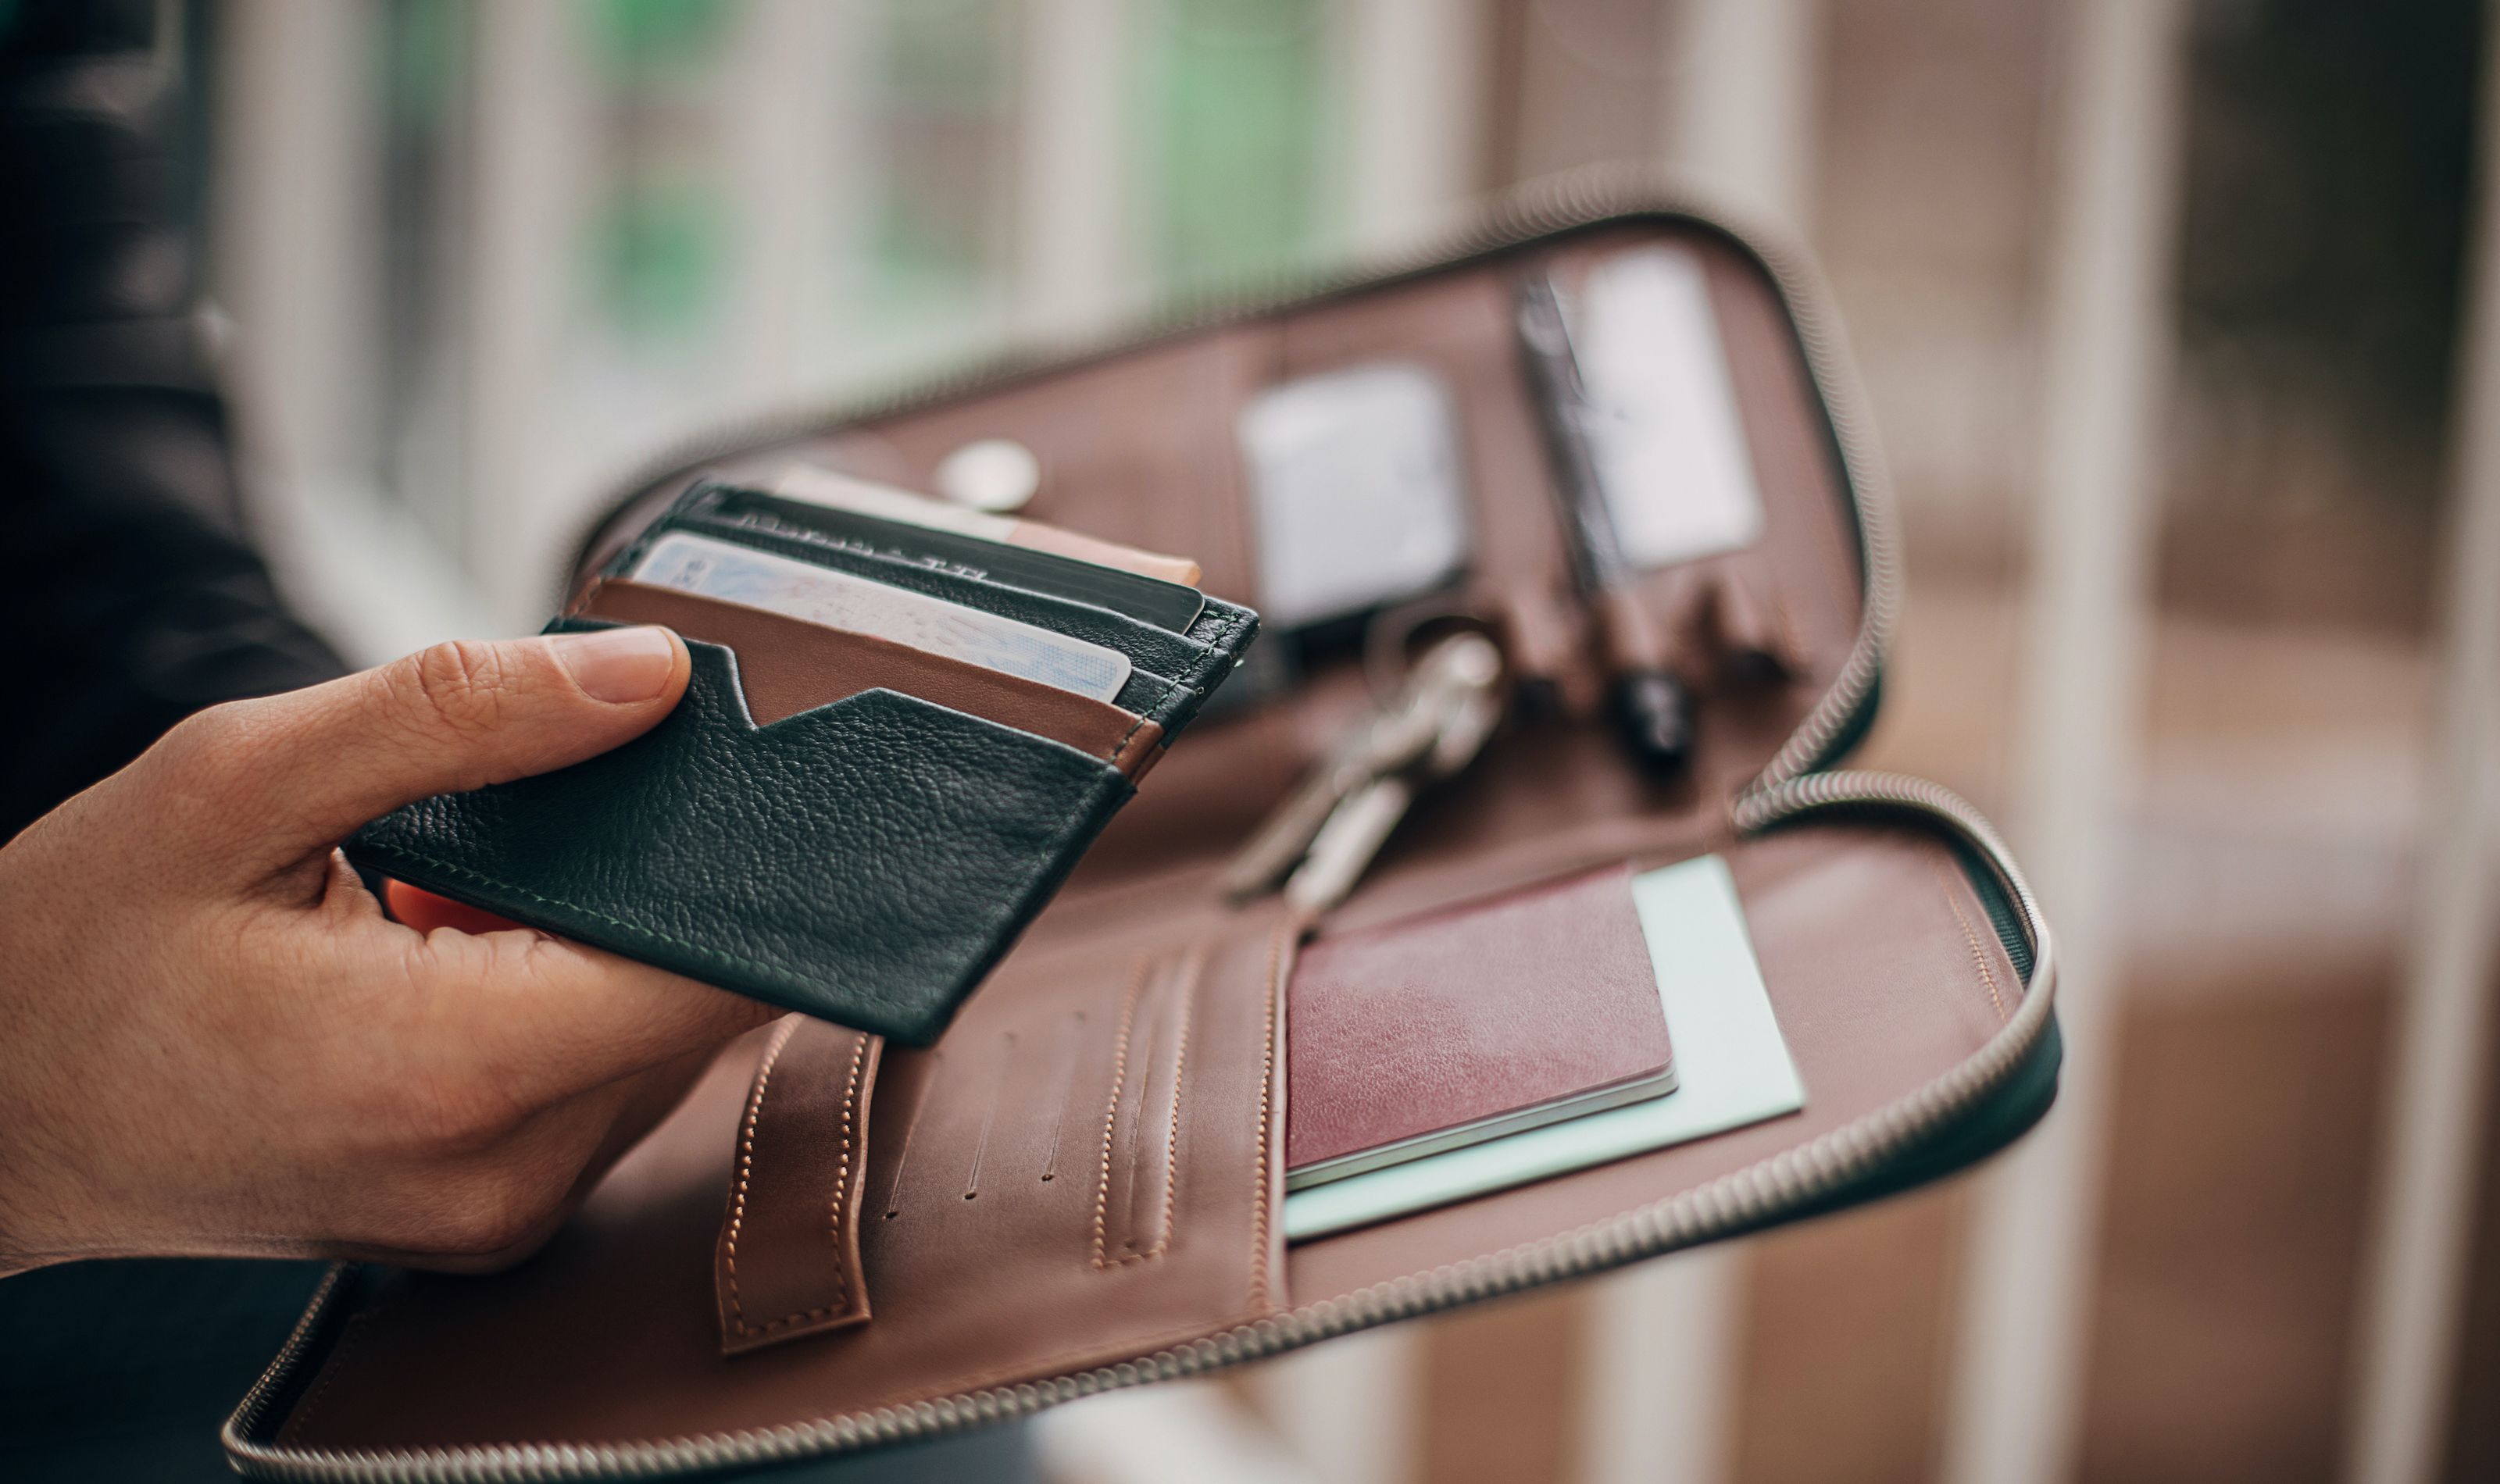 The 13 Best Travel Wallets - Cute Travel Wallets for Every Budget